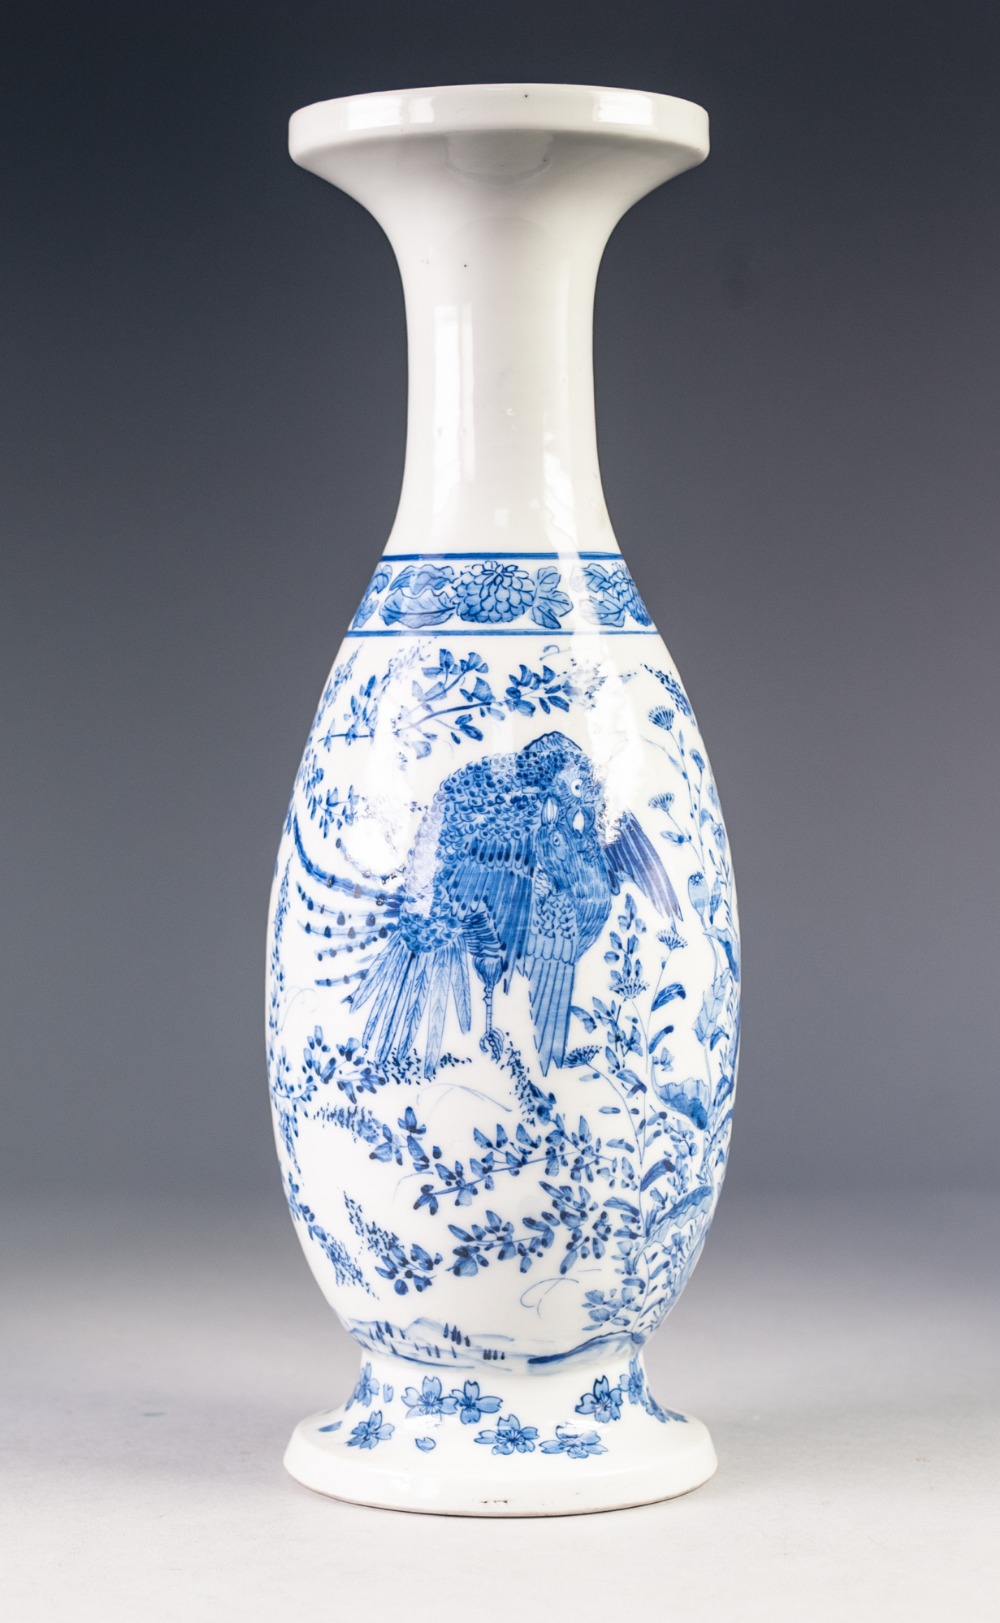 JAPANESE BLUE AND WHITE PORCELAIN VASE, of slender ovoid form with waisted neck and spreading